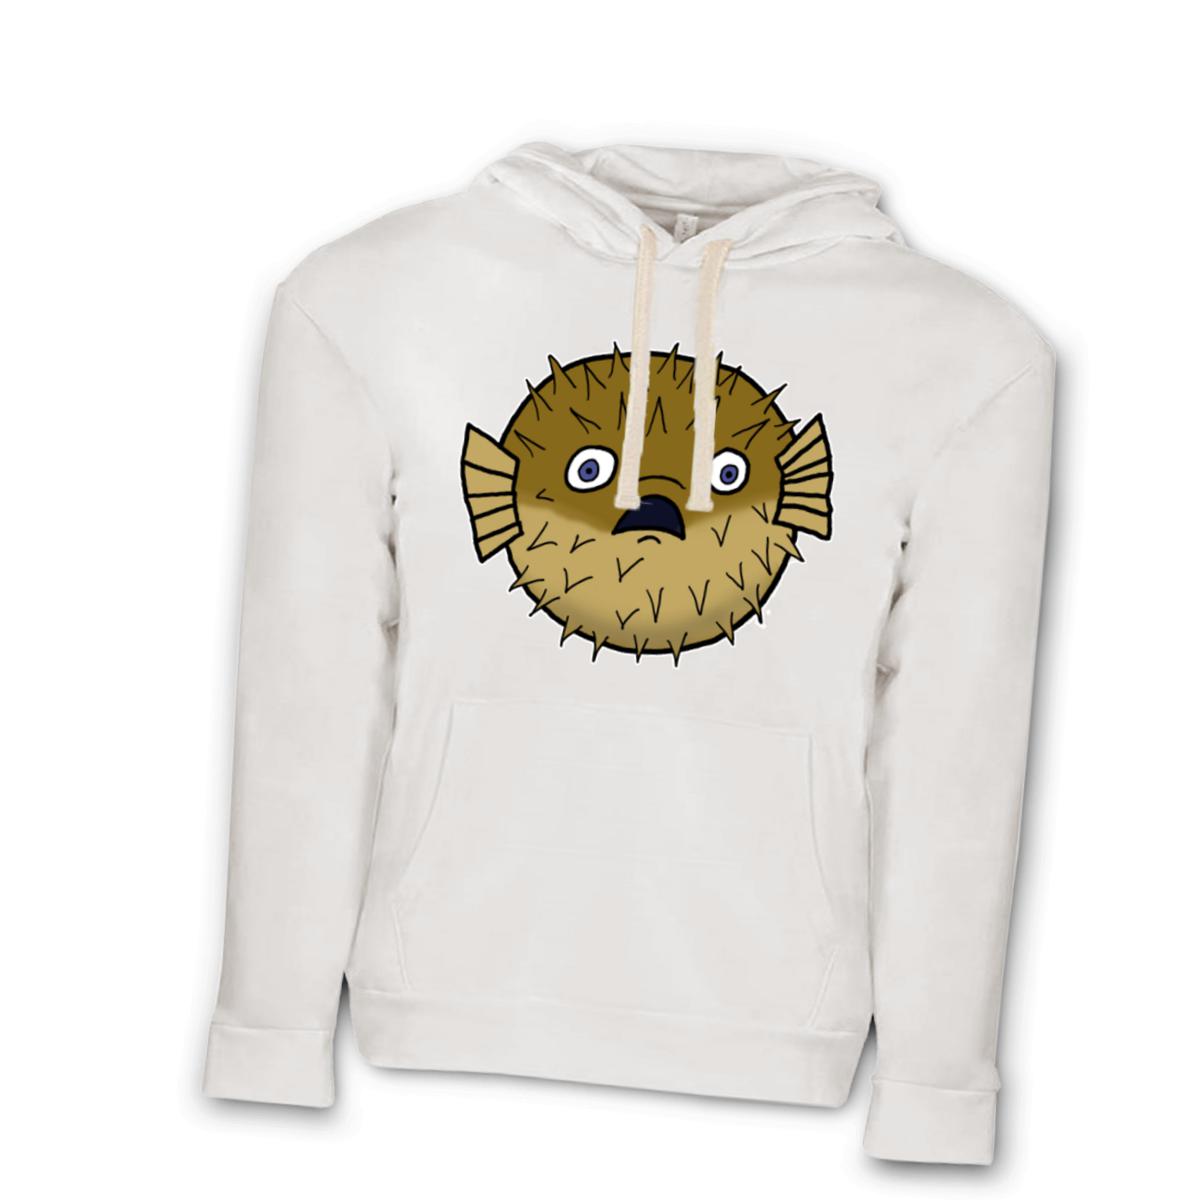 Puffer Fish Unisex Pullover Hoodie Large white